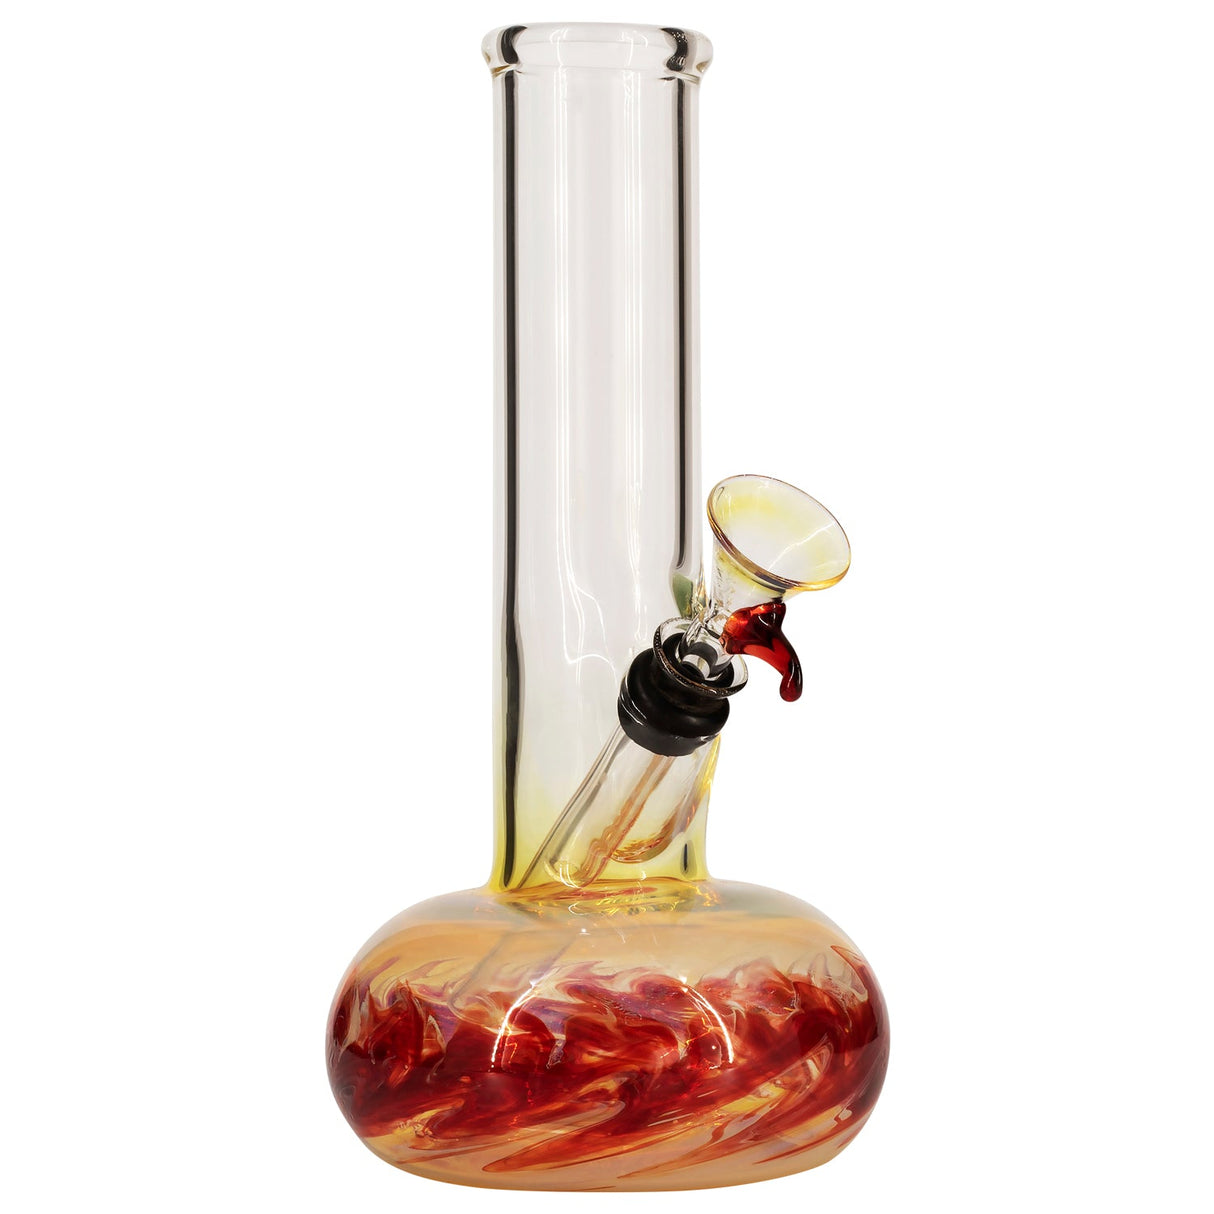 smoking weed out of a bong, Stable Diffusion